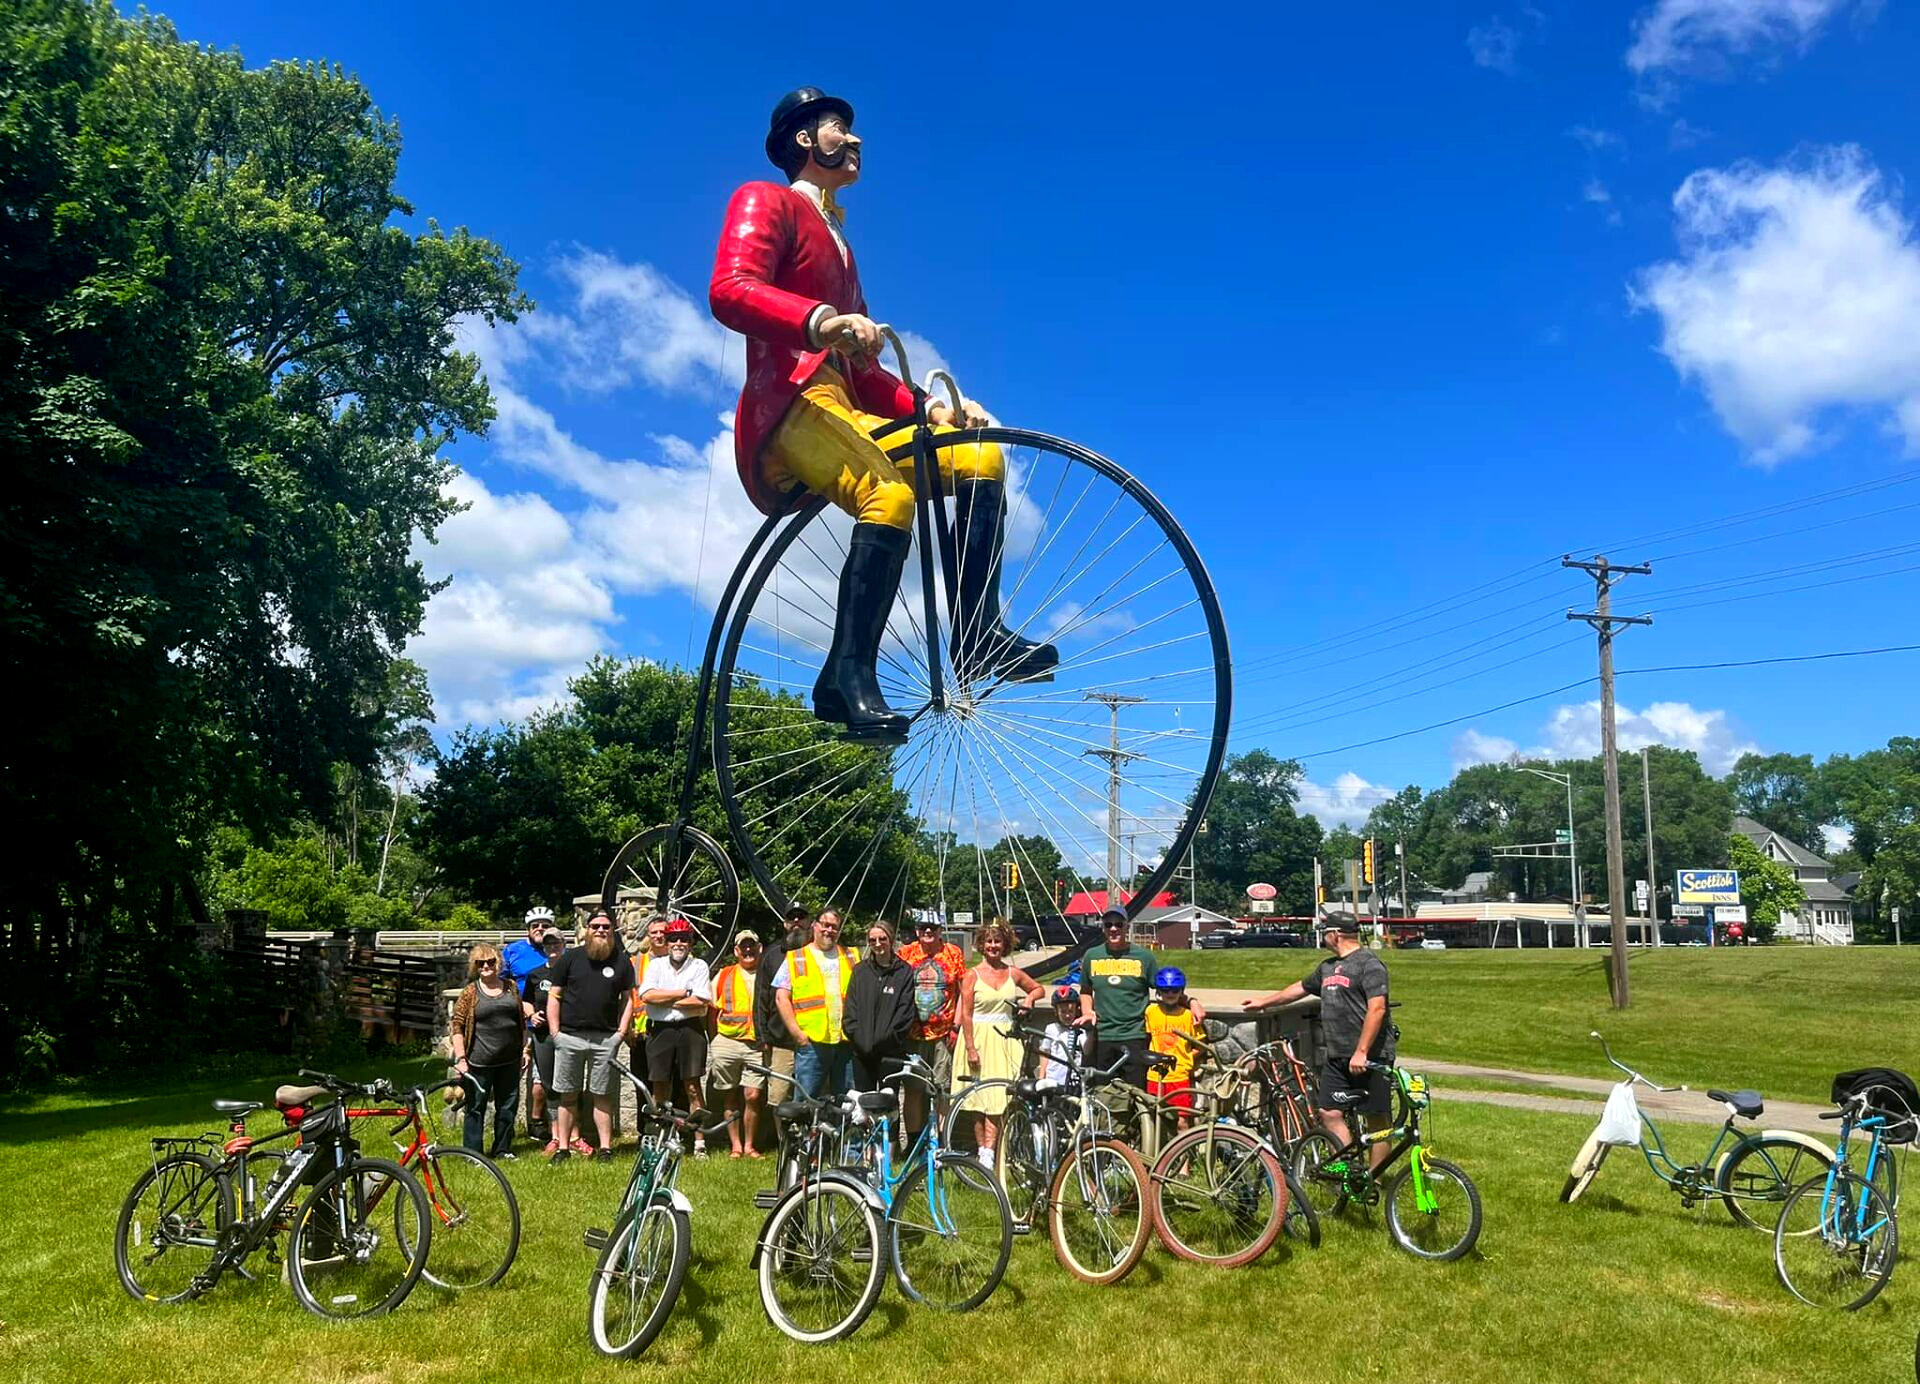 World's Largest Bicyclist: world record set in Sparta, Wisconsin